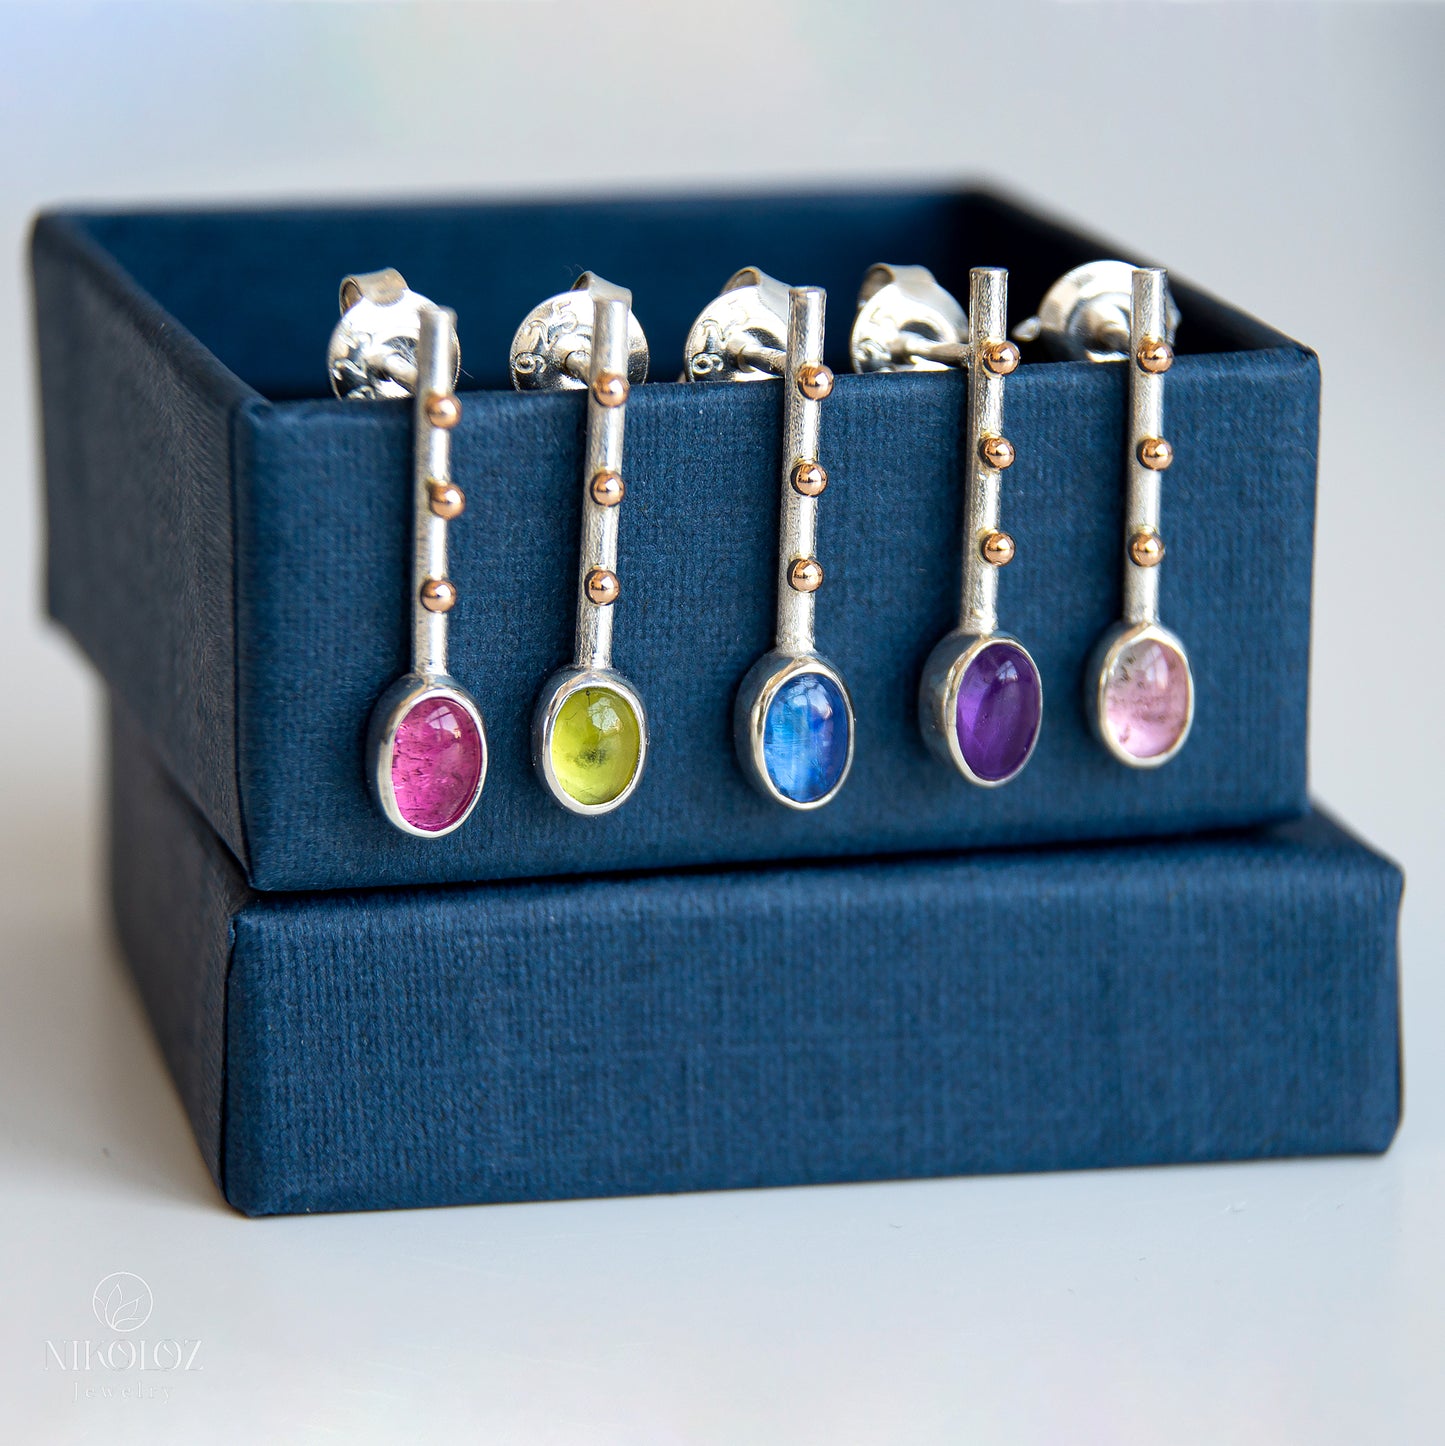 Multicolour Silver Earrings "Music Notes" with 14K Gold Beads